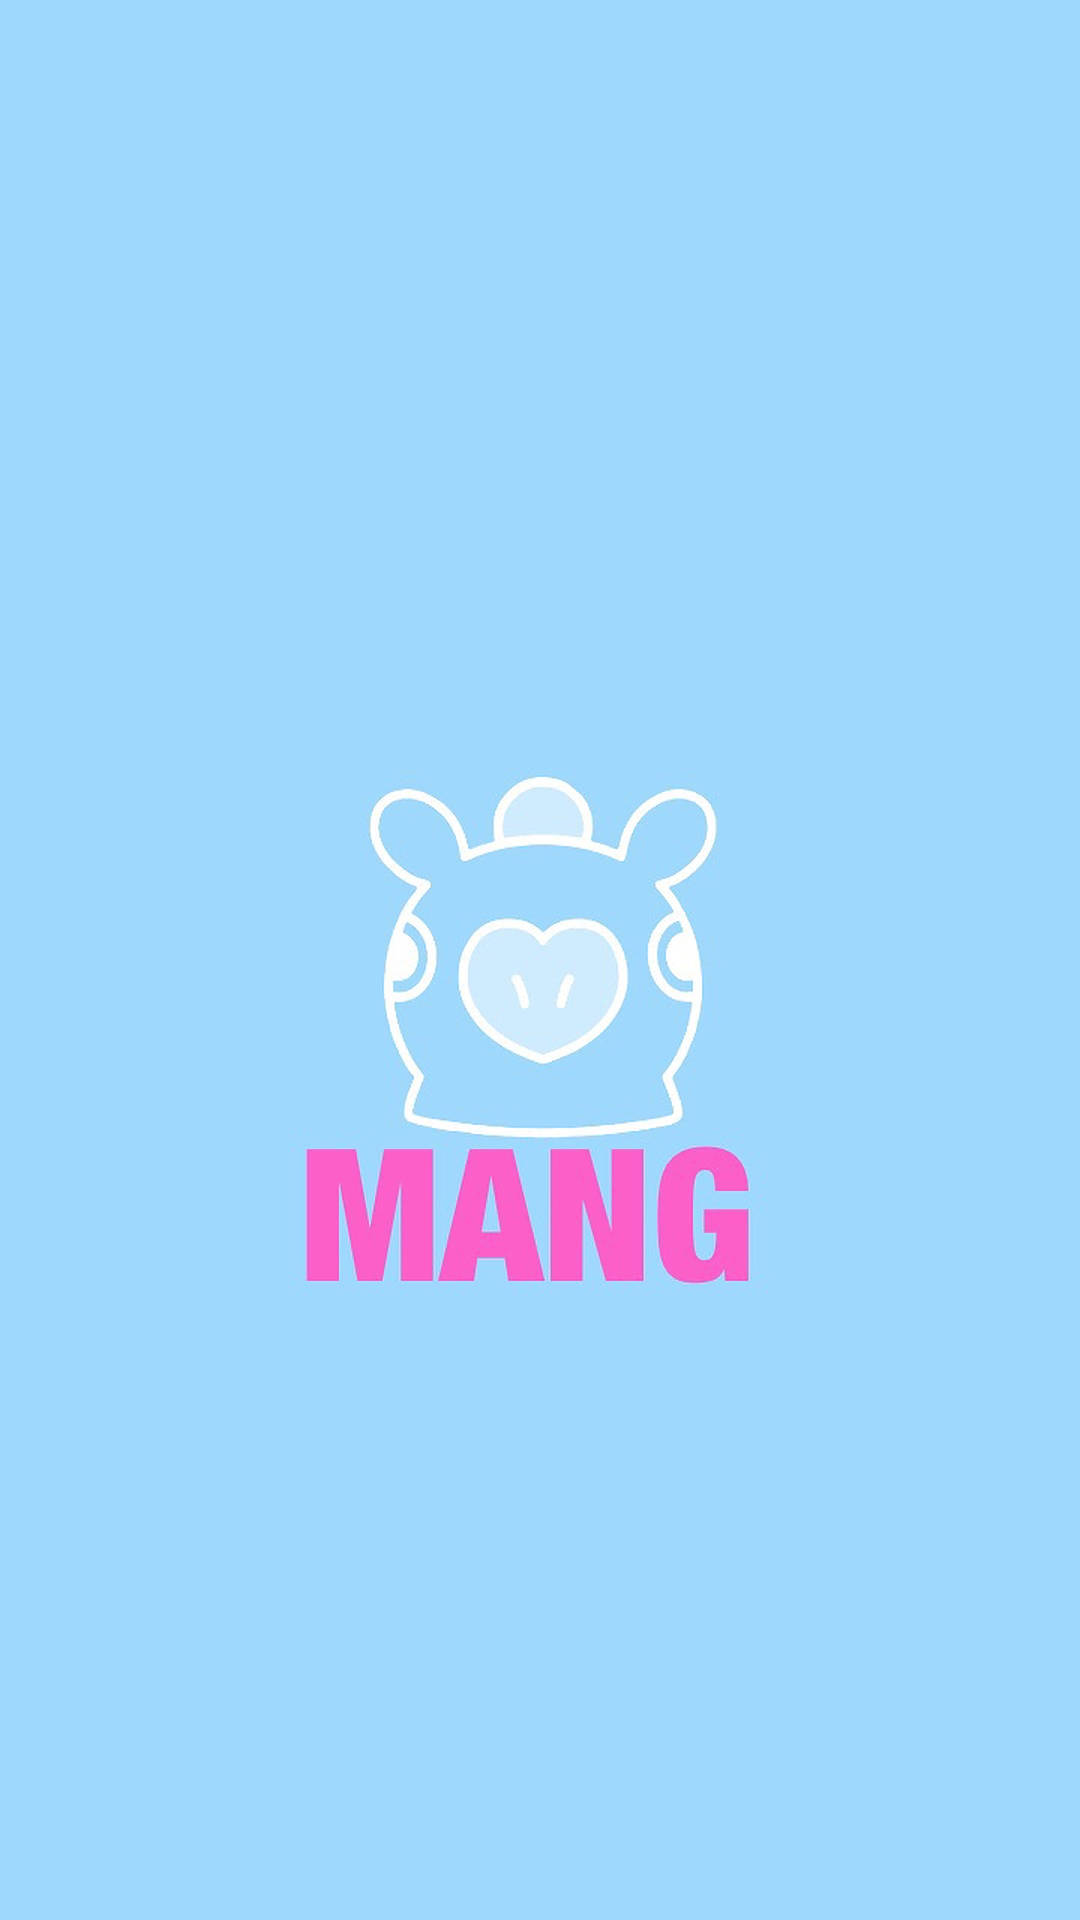 Mangbt21 Silhouette Would Be Translated To Mang Bt21 Silhuett In Swedish. Wallpaper